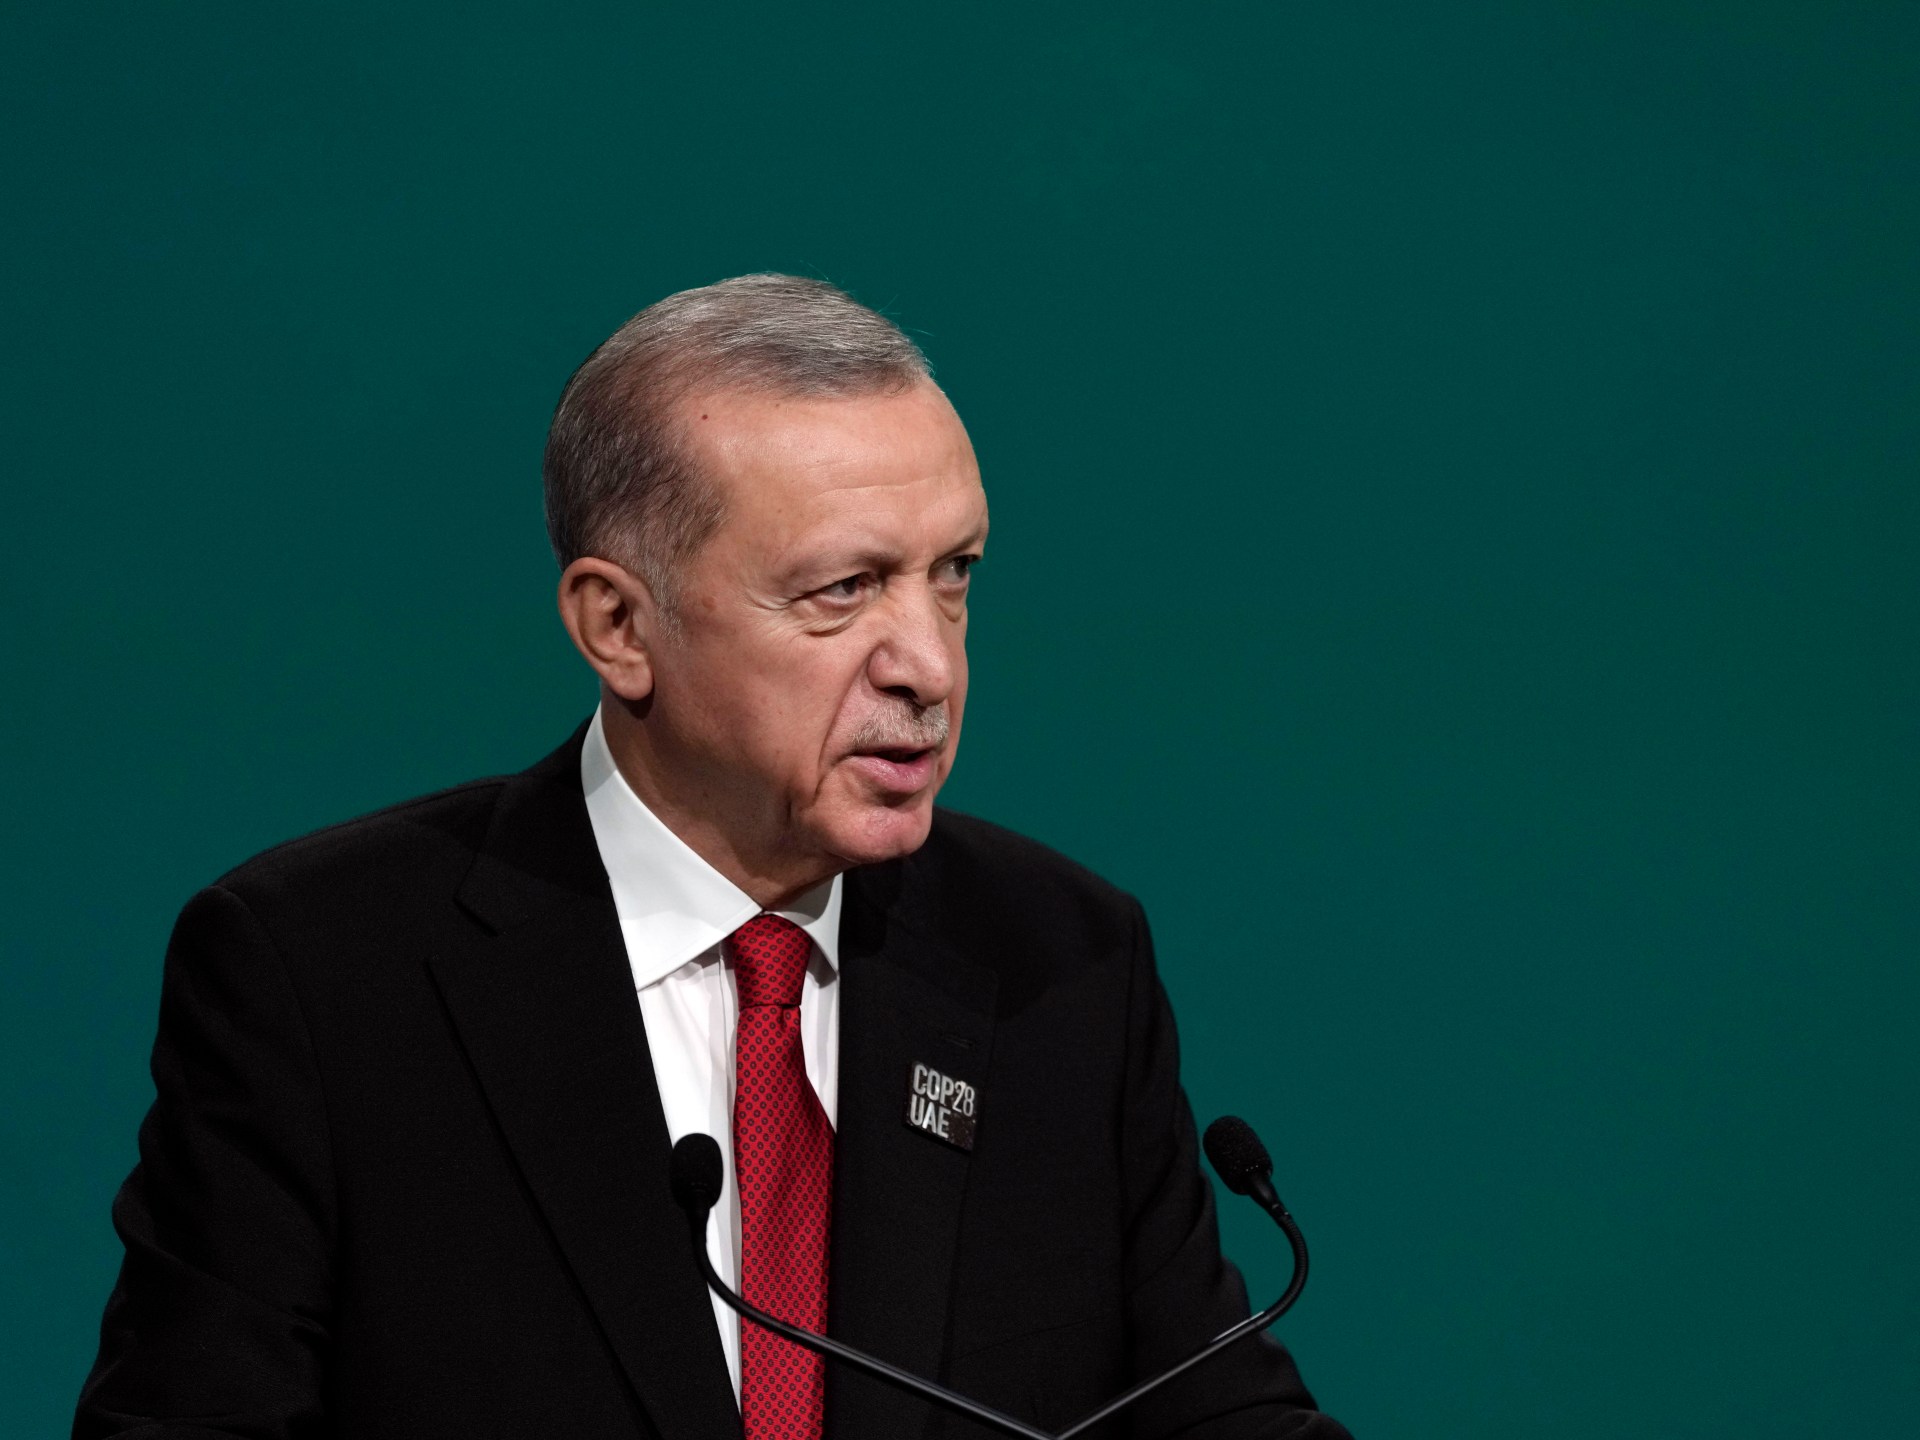 Erdogan expects steps from US on F-16 sale for Sweden NATO accession | News #Erdogan #expects #steps #F16 #sale #Sweden #NATO #accession #News